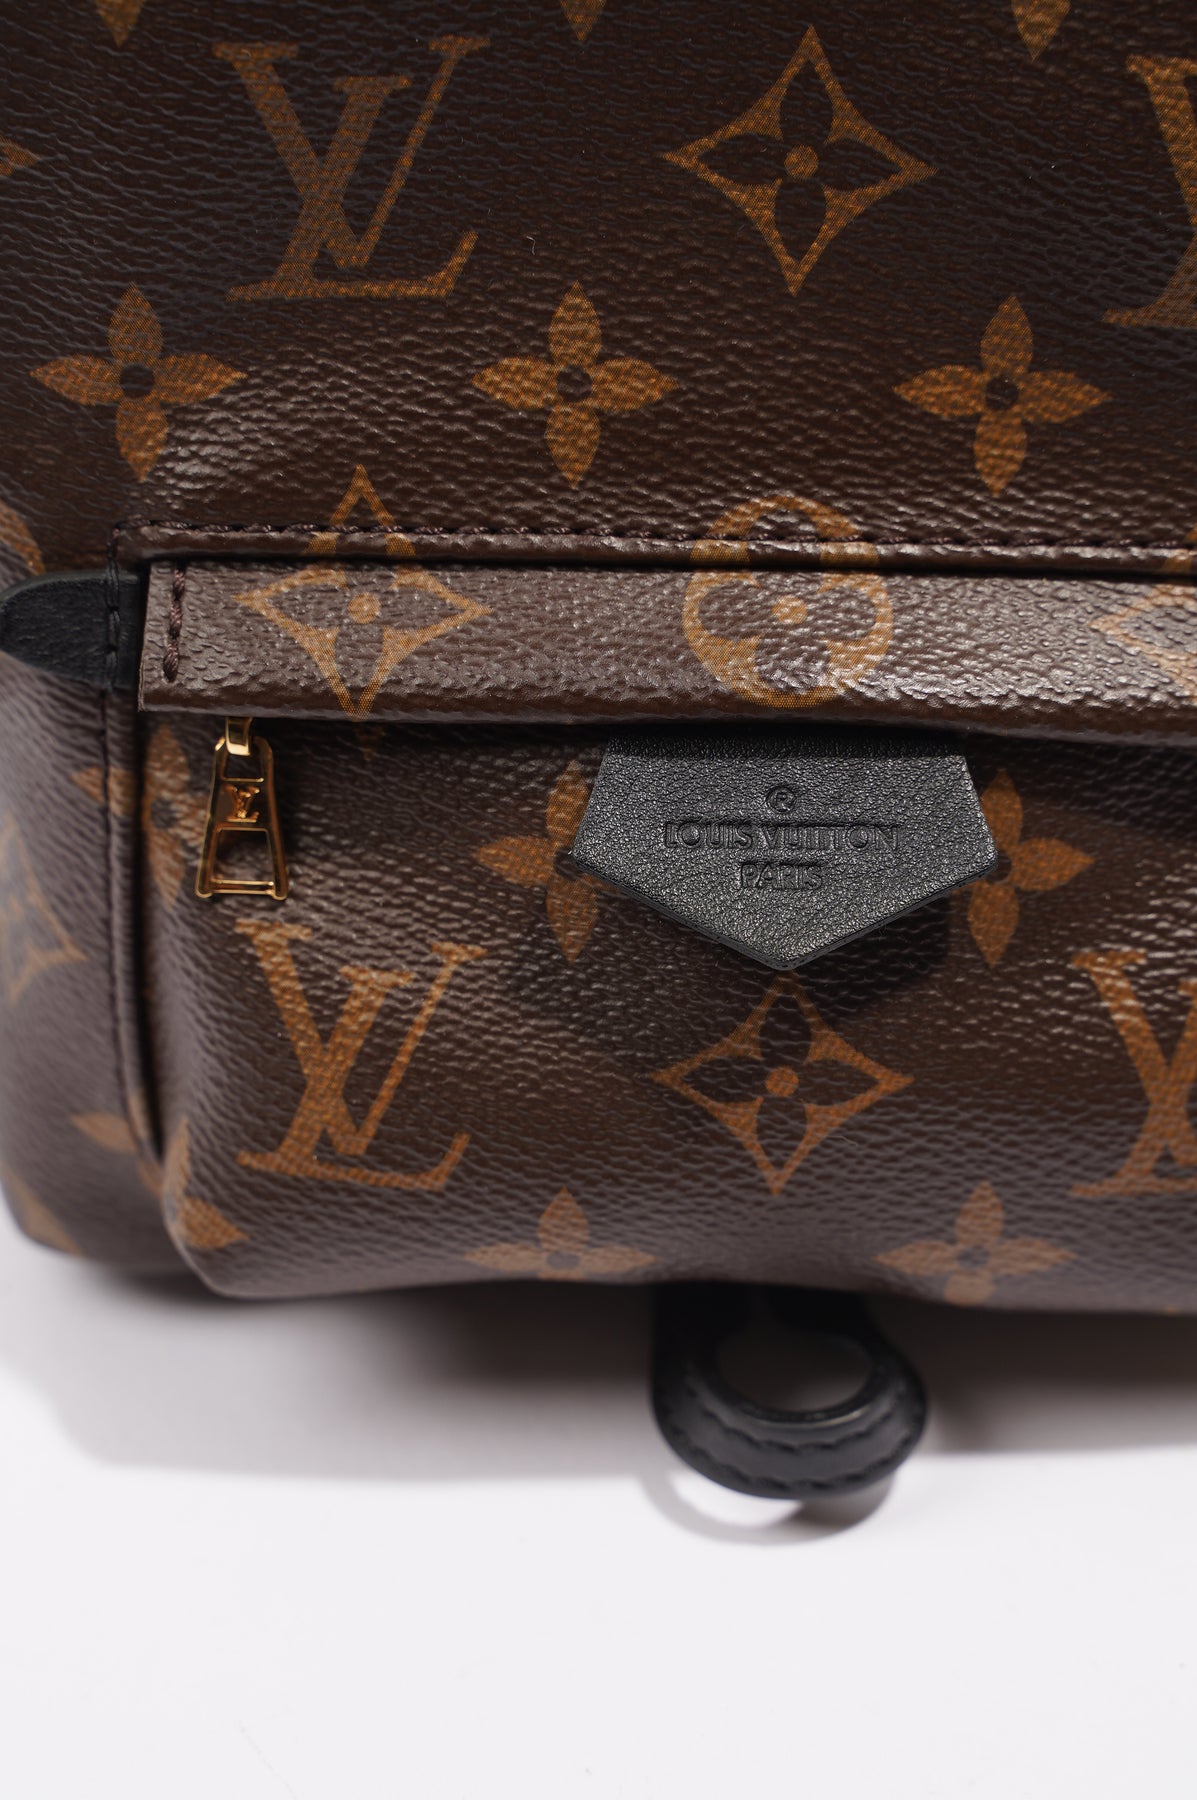 SWAGGER  Louis vuitton backpack mini, Louis vuitton backpack, Louis vuitton  handbags